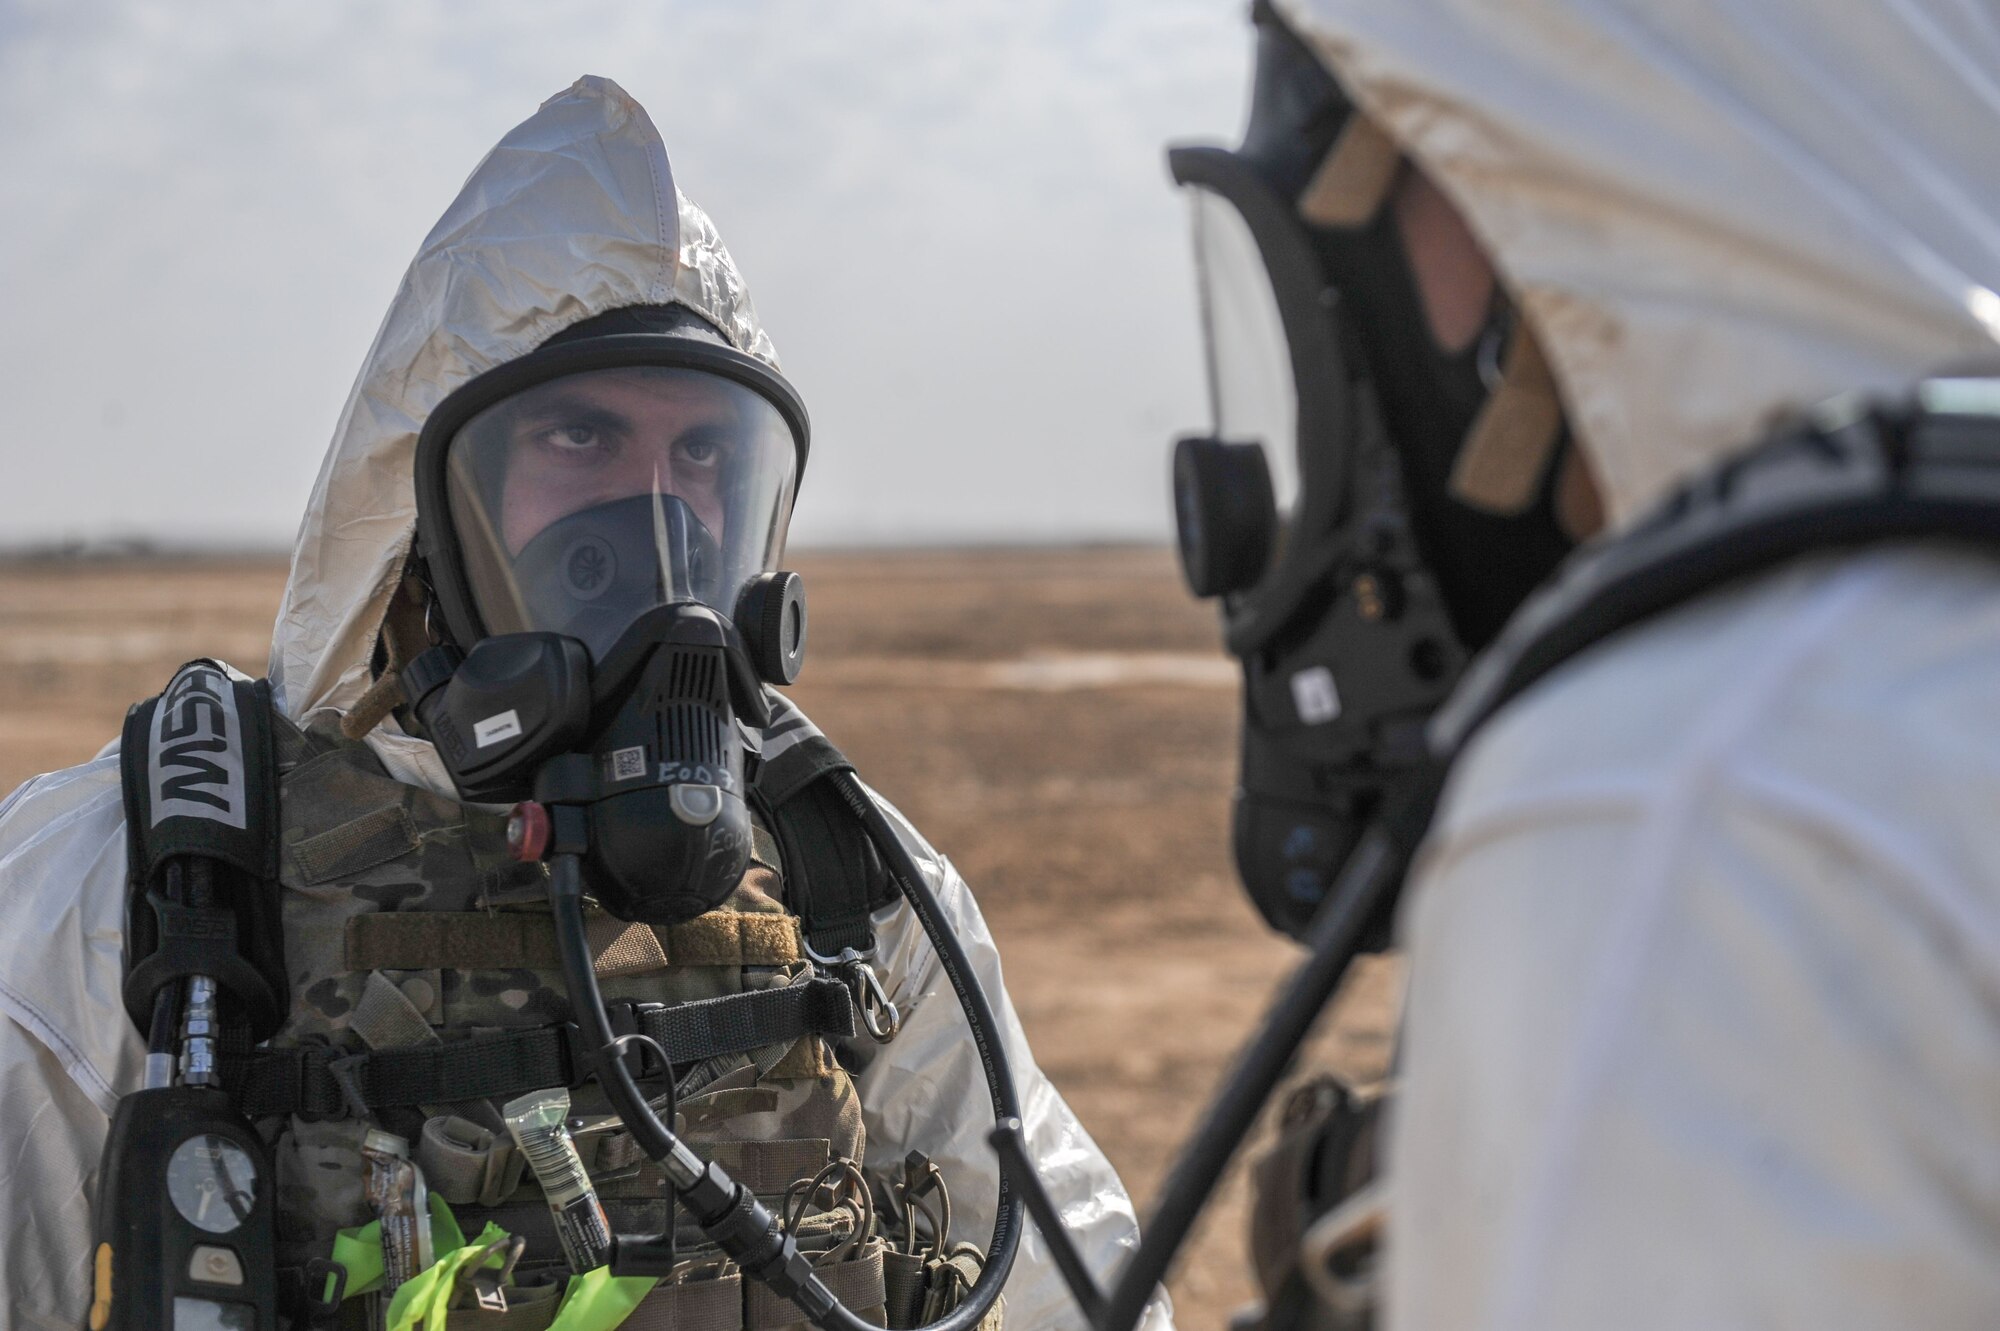 Tech Sgt. Charles Piccolomini, 380th Expeditionary Civil Engineer Squadron, explosive ordnance disposal, logistics section chief, evaluates his wingman on the implementation of EOD procedures during the Major Accident Reponses Exercise at Al Dhafra Air Base, United Arab Emirates Dec 15, 2017. The MARE is designed to test and evaluate the procedures of first responders. (U.S. Air National Guard Photo by Staff Sgt. Colton Elliott)